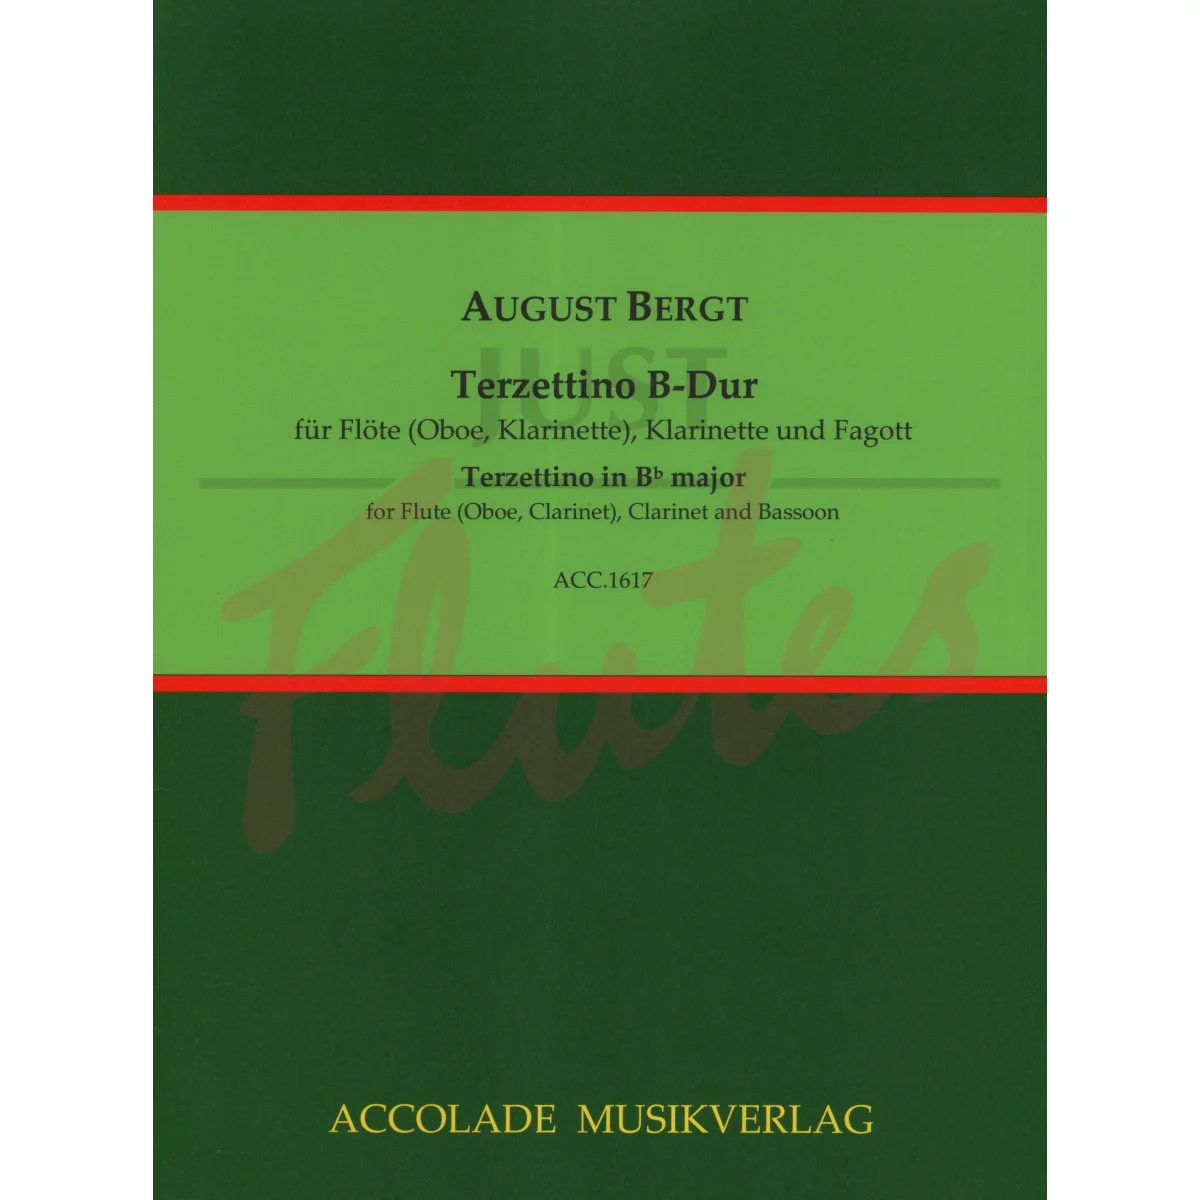 Terzettino in Bb major for Flute, Clarinet and Bassoon